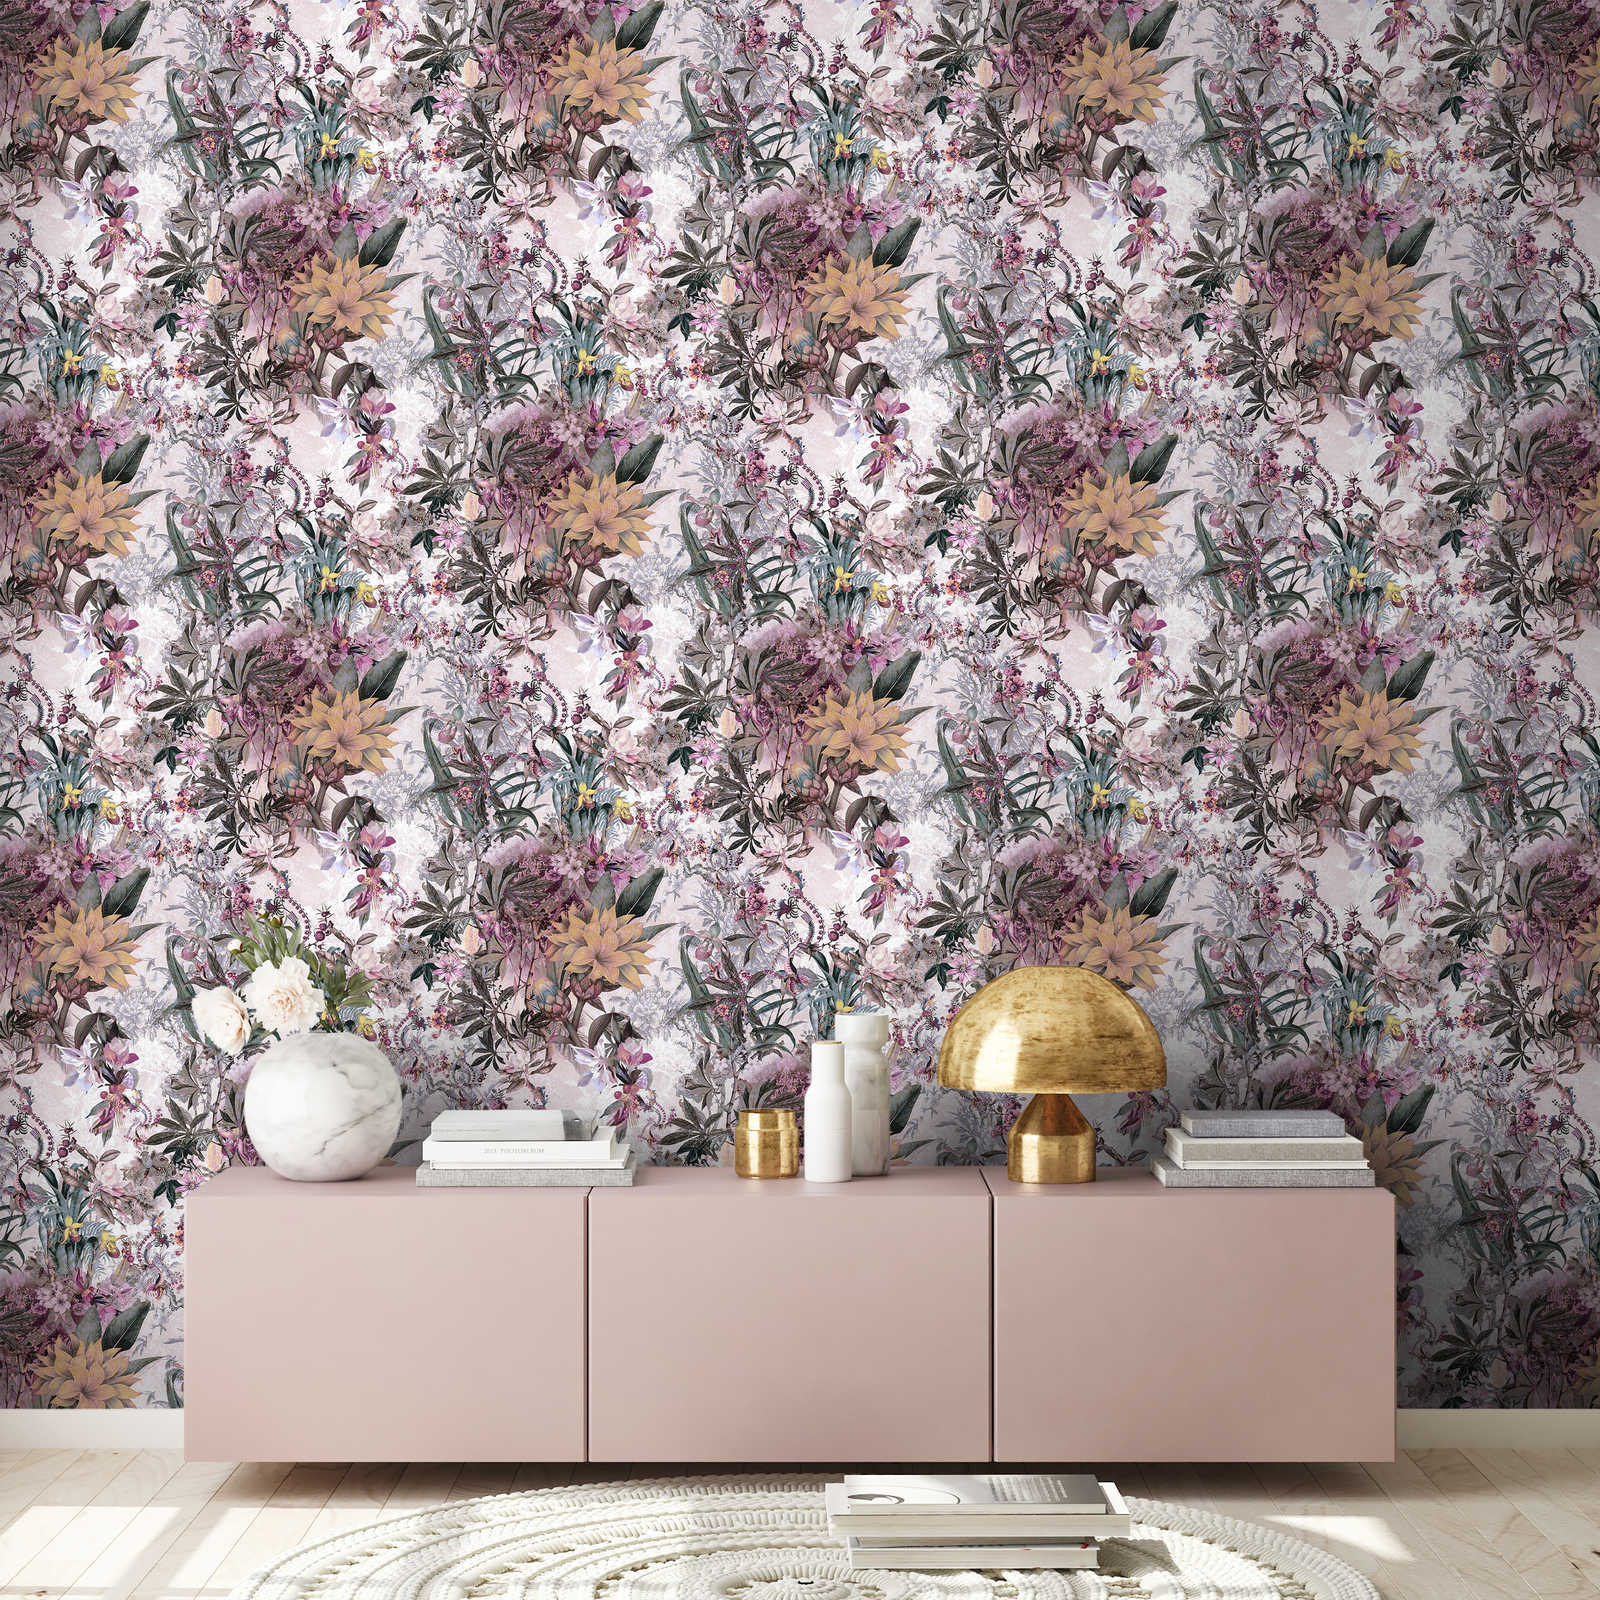             Motif wallpaper flowers design with floral pattern - multicoloured
        